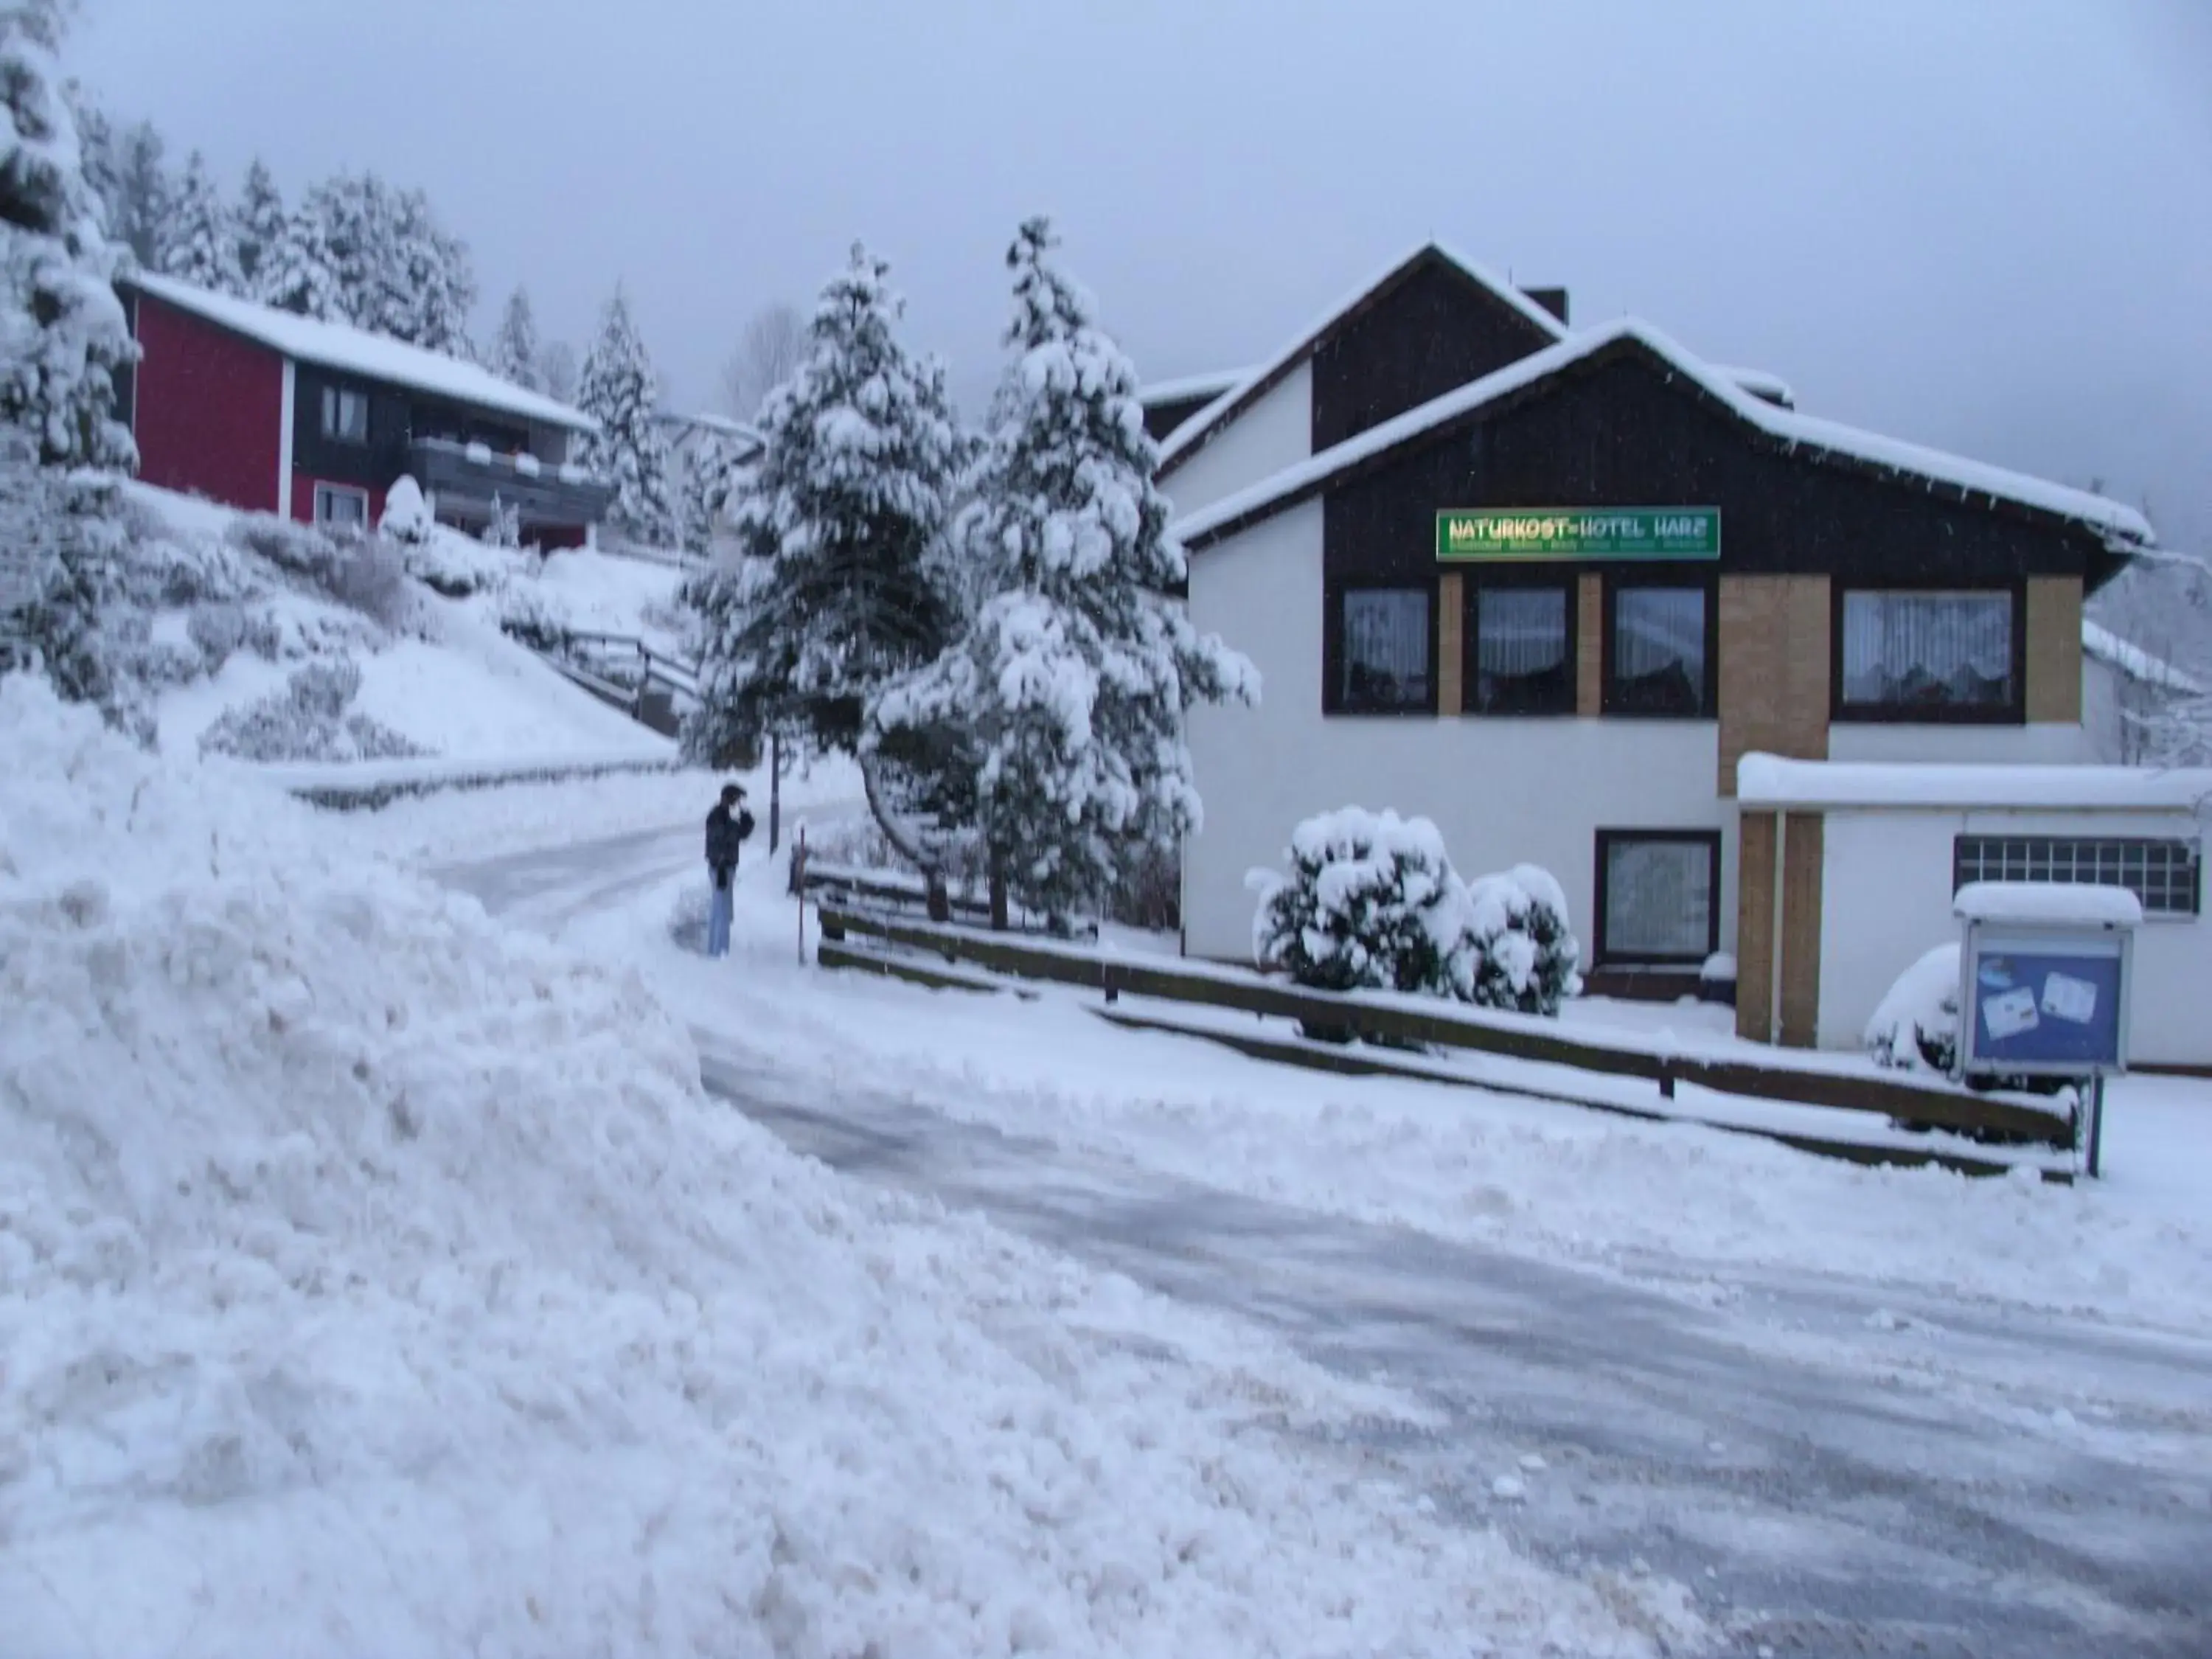 Property building, Winter in Naturkost-Hotel Harz